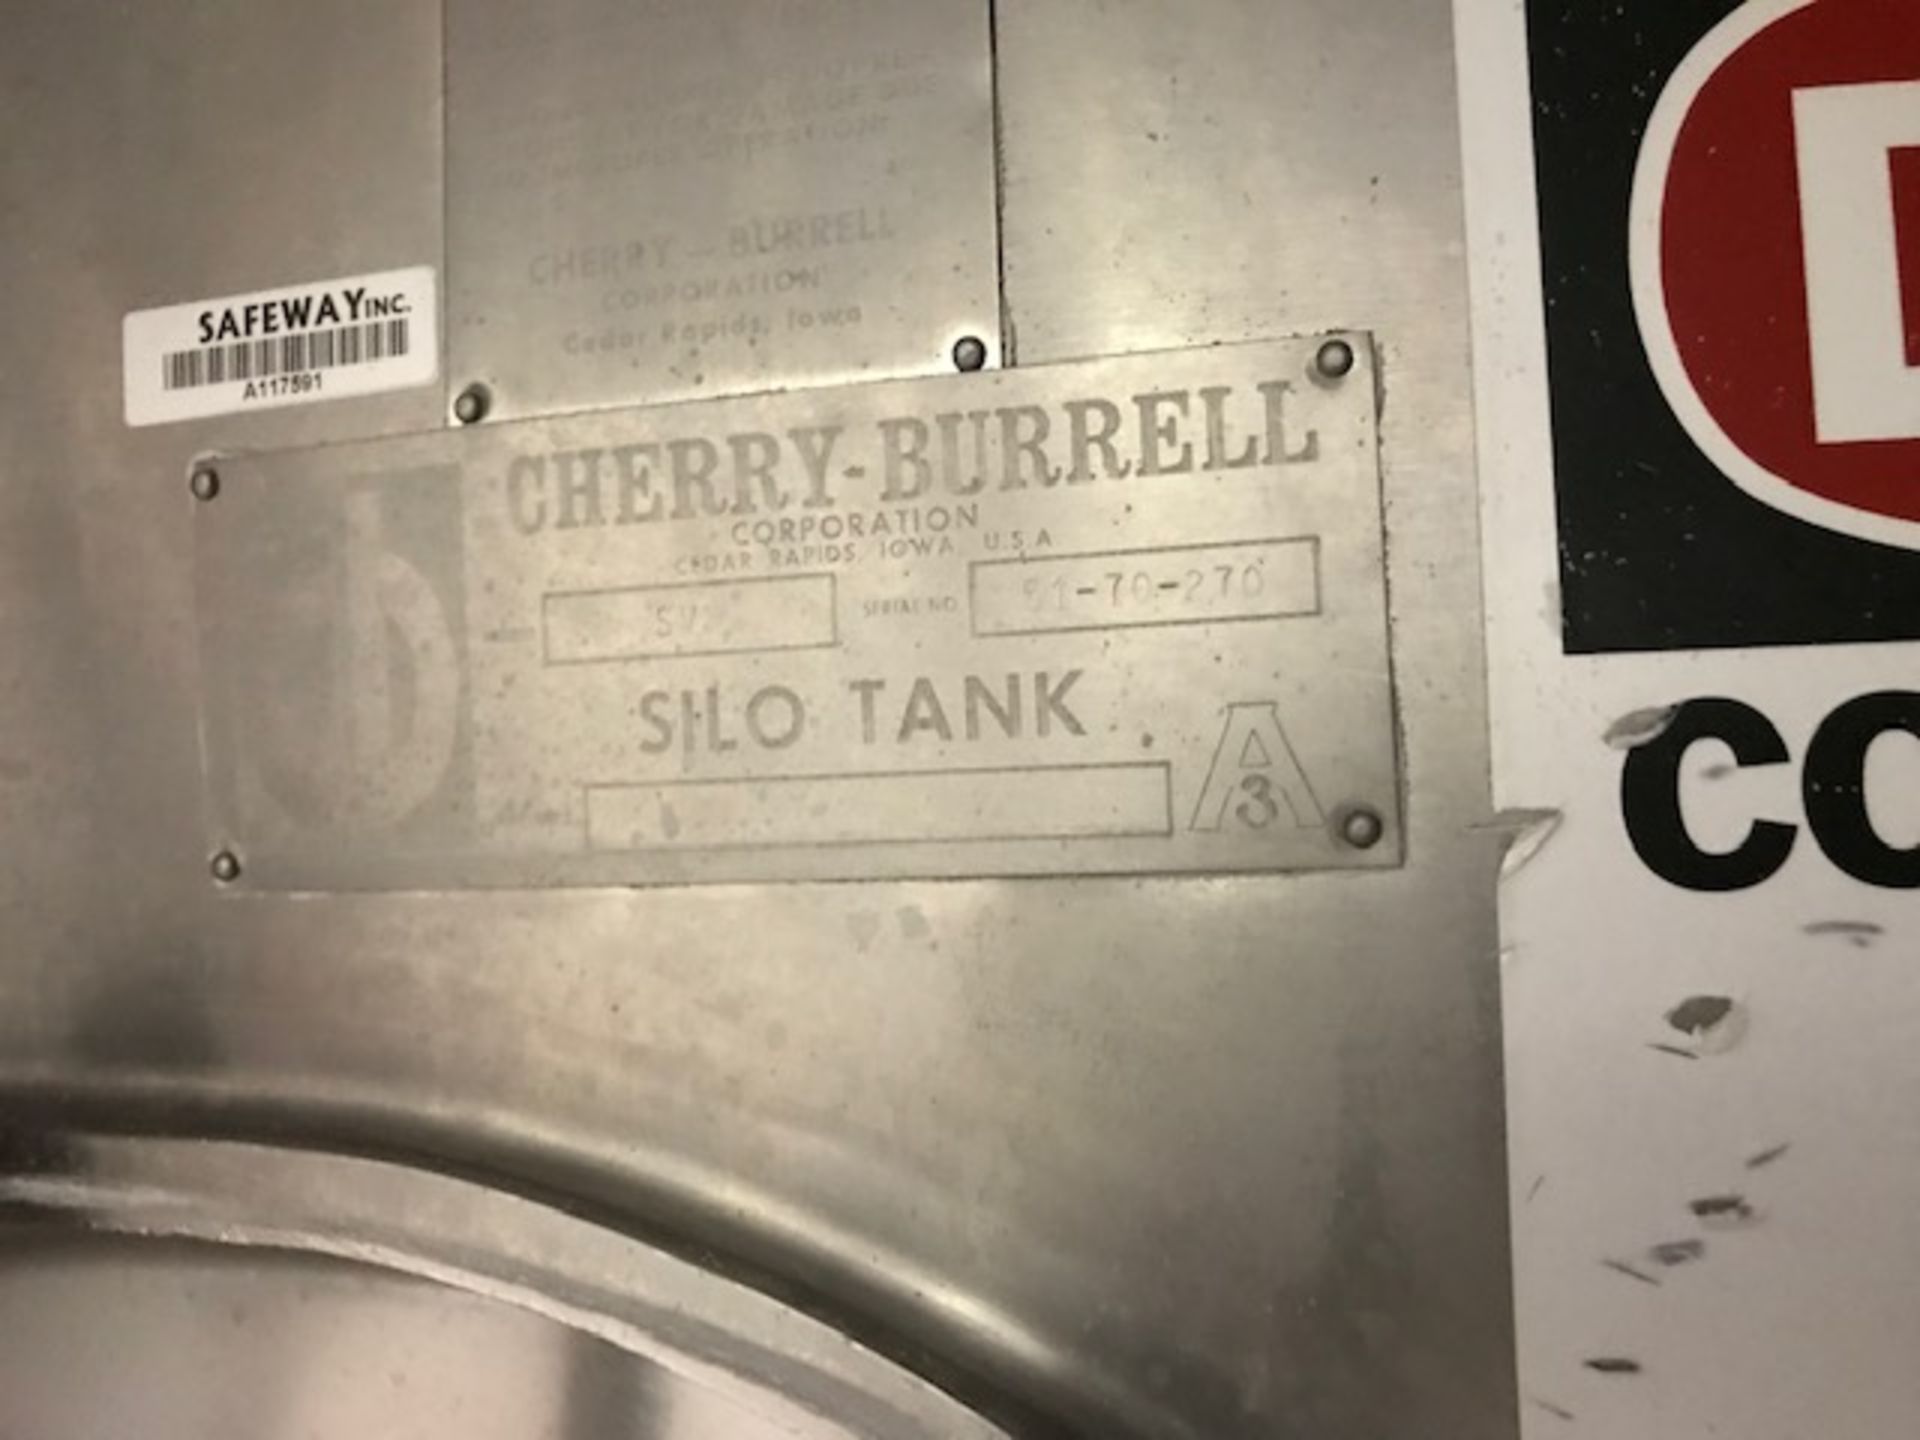 Cherry Burrell Jacketed Cream Silo, Model SV2, S/N 51-70-270, Horizontal Agitation (Located in - Image 5 of 11